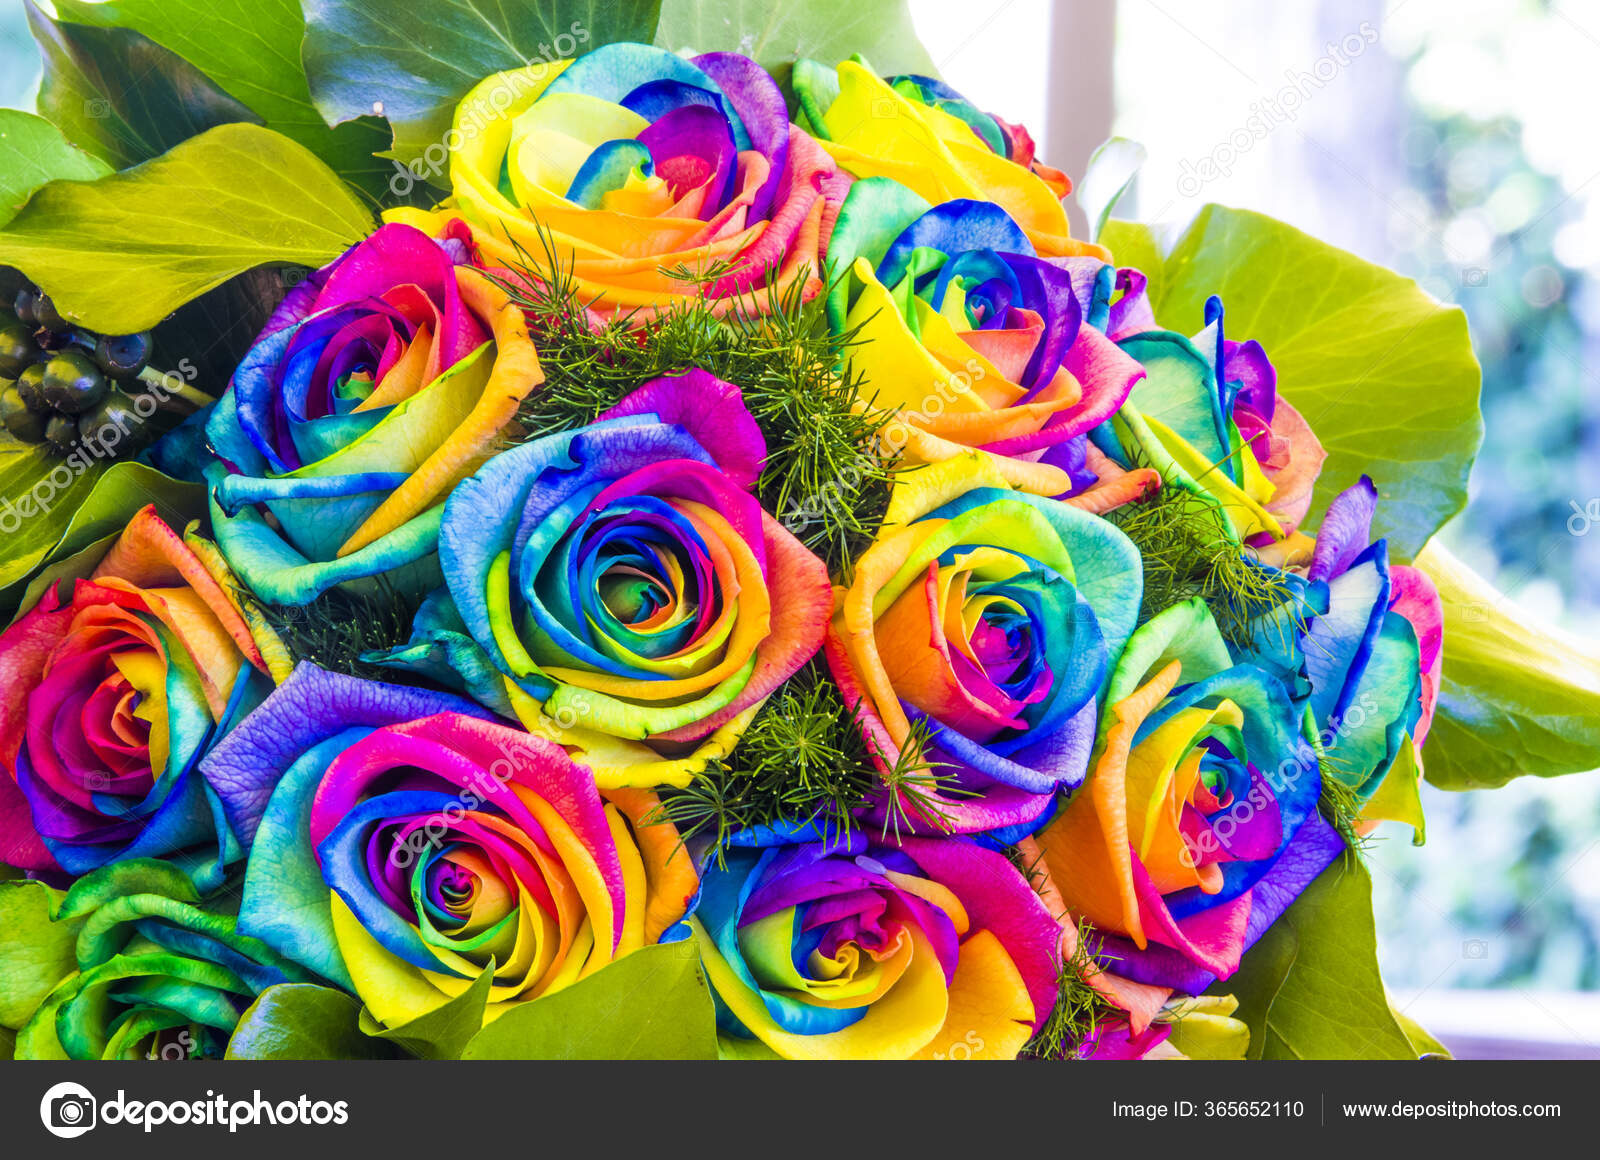 Multicolored Flowers Roses Symbol Love Your Joy Your Happiness ...